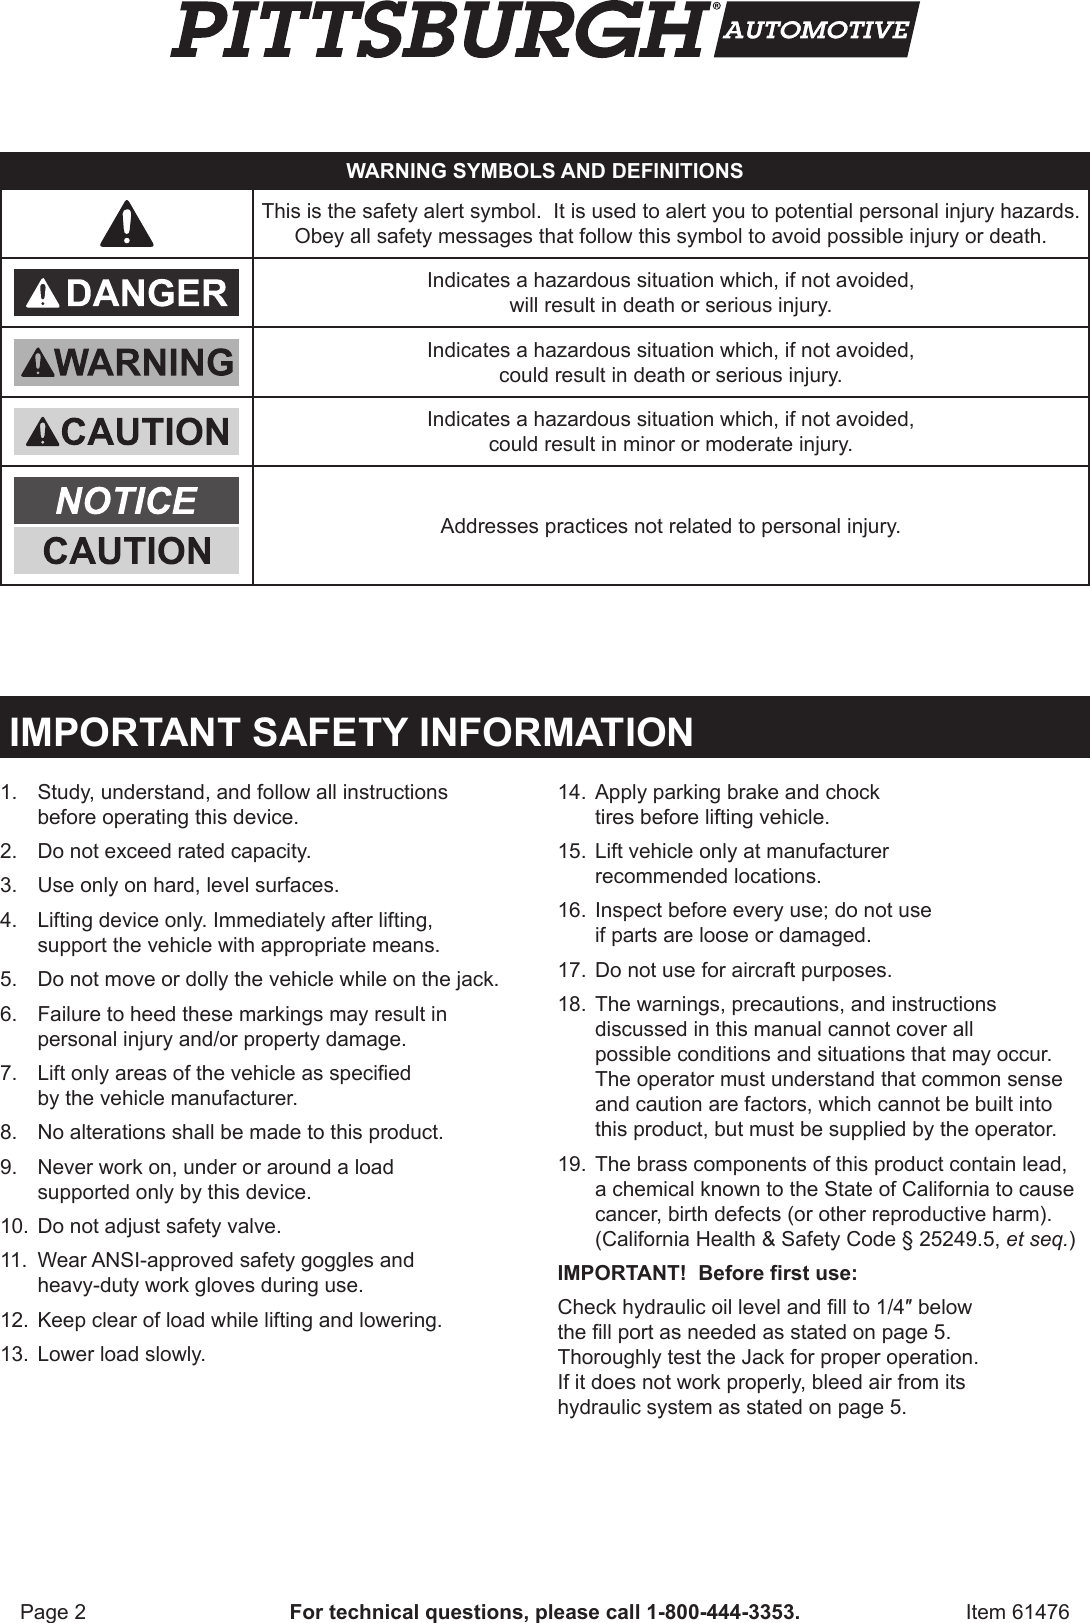 Page 2 of 12 - Harbor-Freight Harbor-Freight-22-Ton-Air-Hydraulic-Floor-Jack-Product-Manual-  Harbor-freight-22-ton-air-hydraulic-floor-jack-product-manual